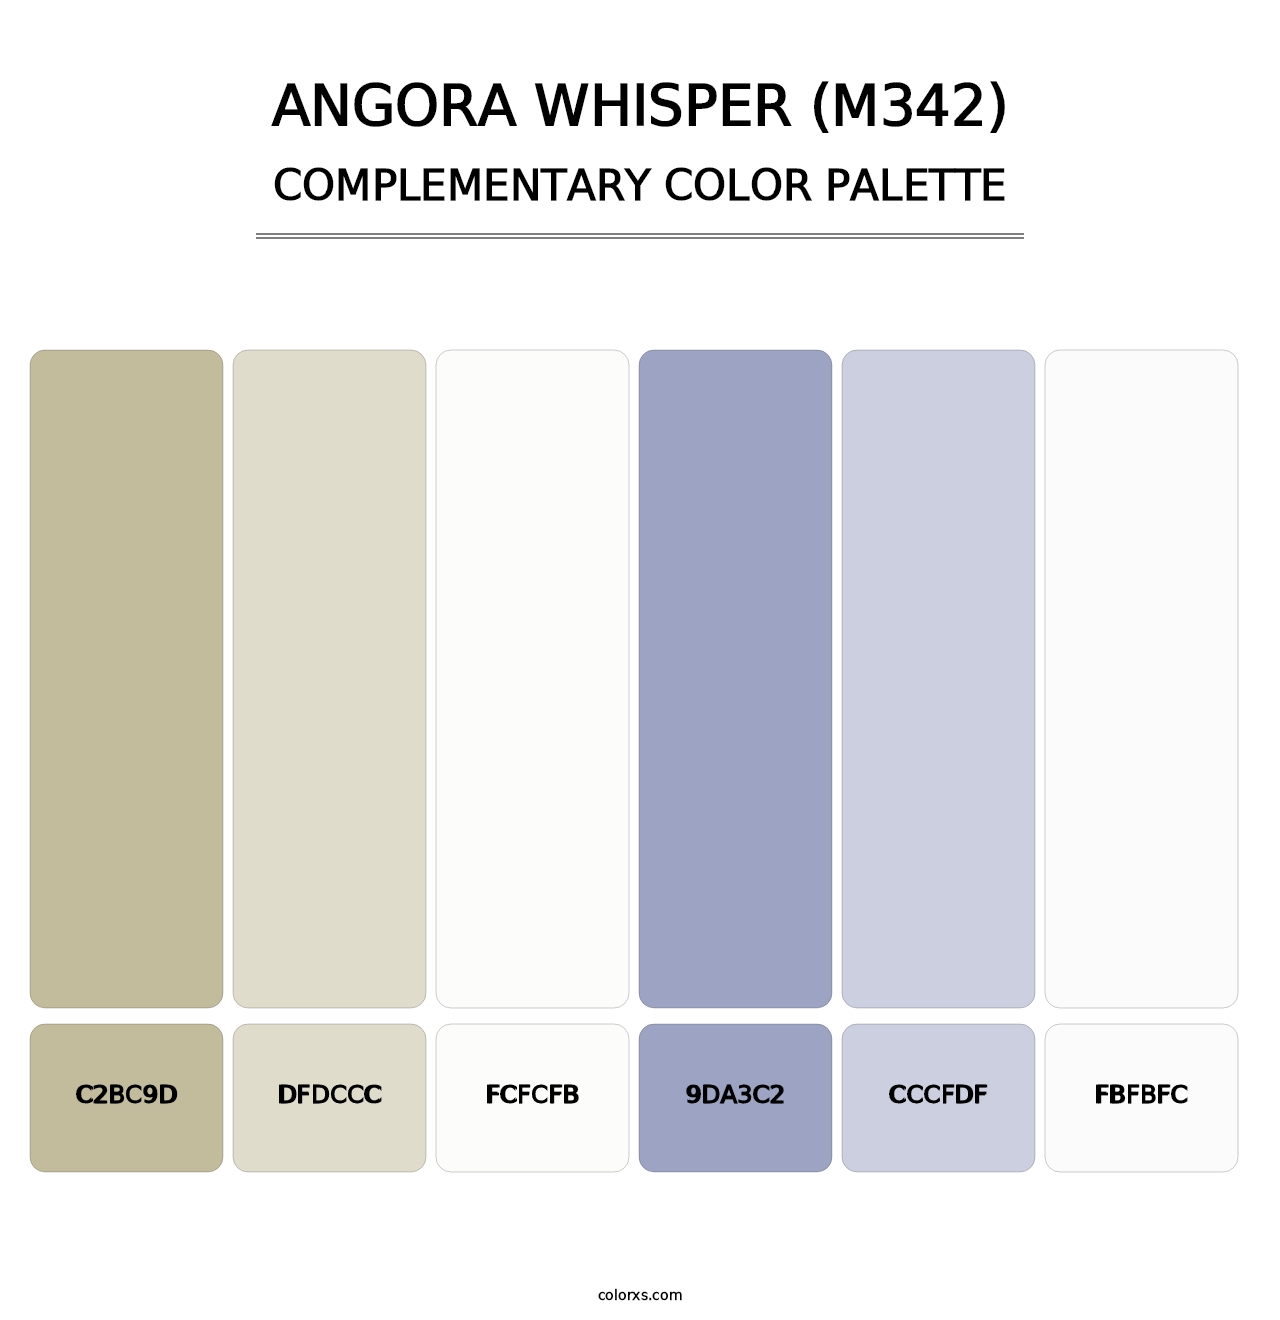 Angora Whisper (M342) - Complementary Color Palette